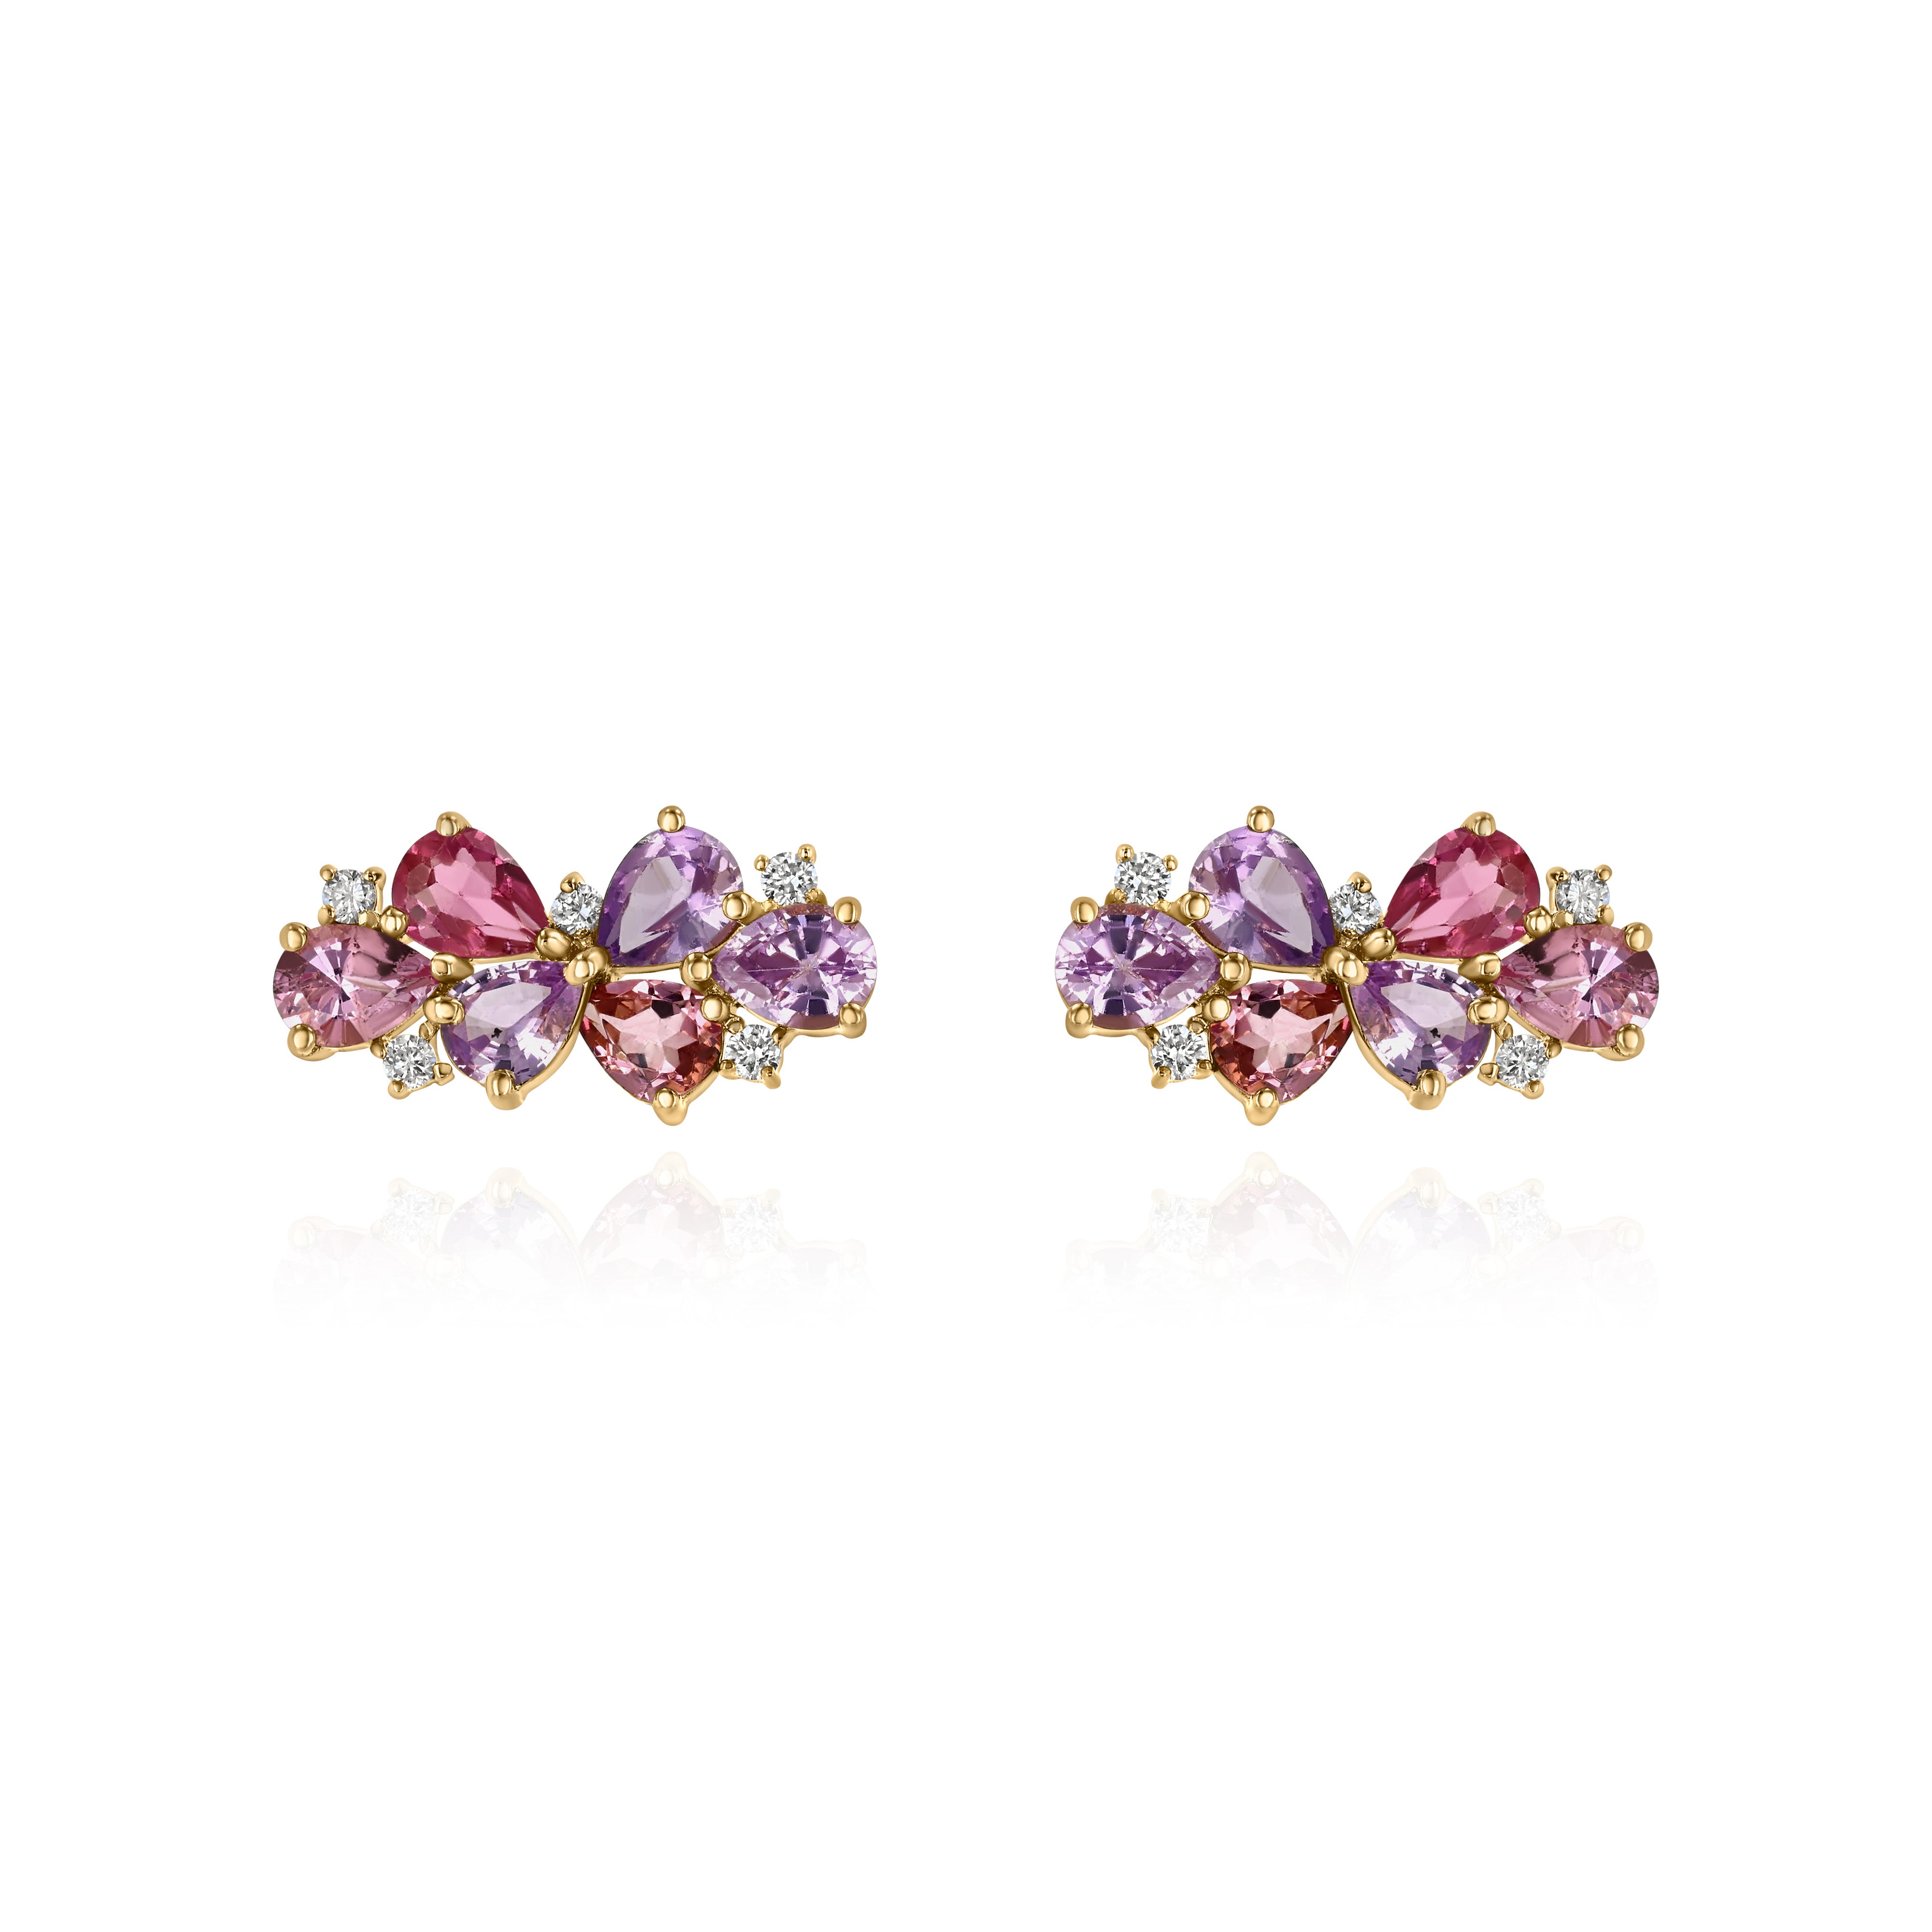 Yellow Gold Earrings with Pink Tourmaline, Purple Sapphires, and Diamonds, Small